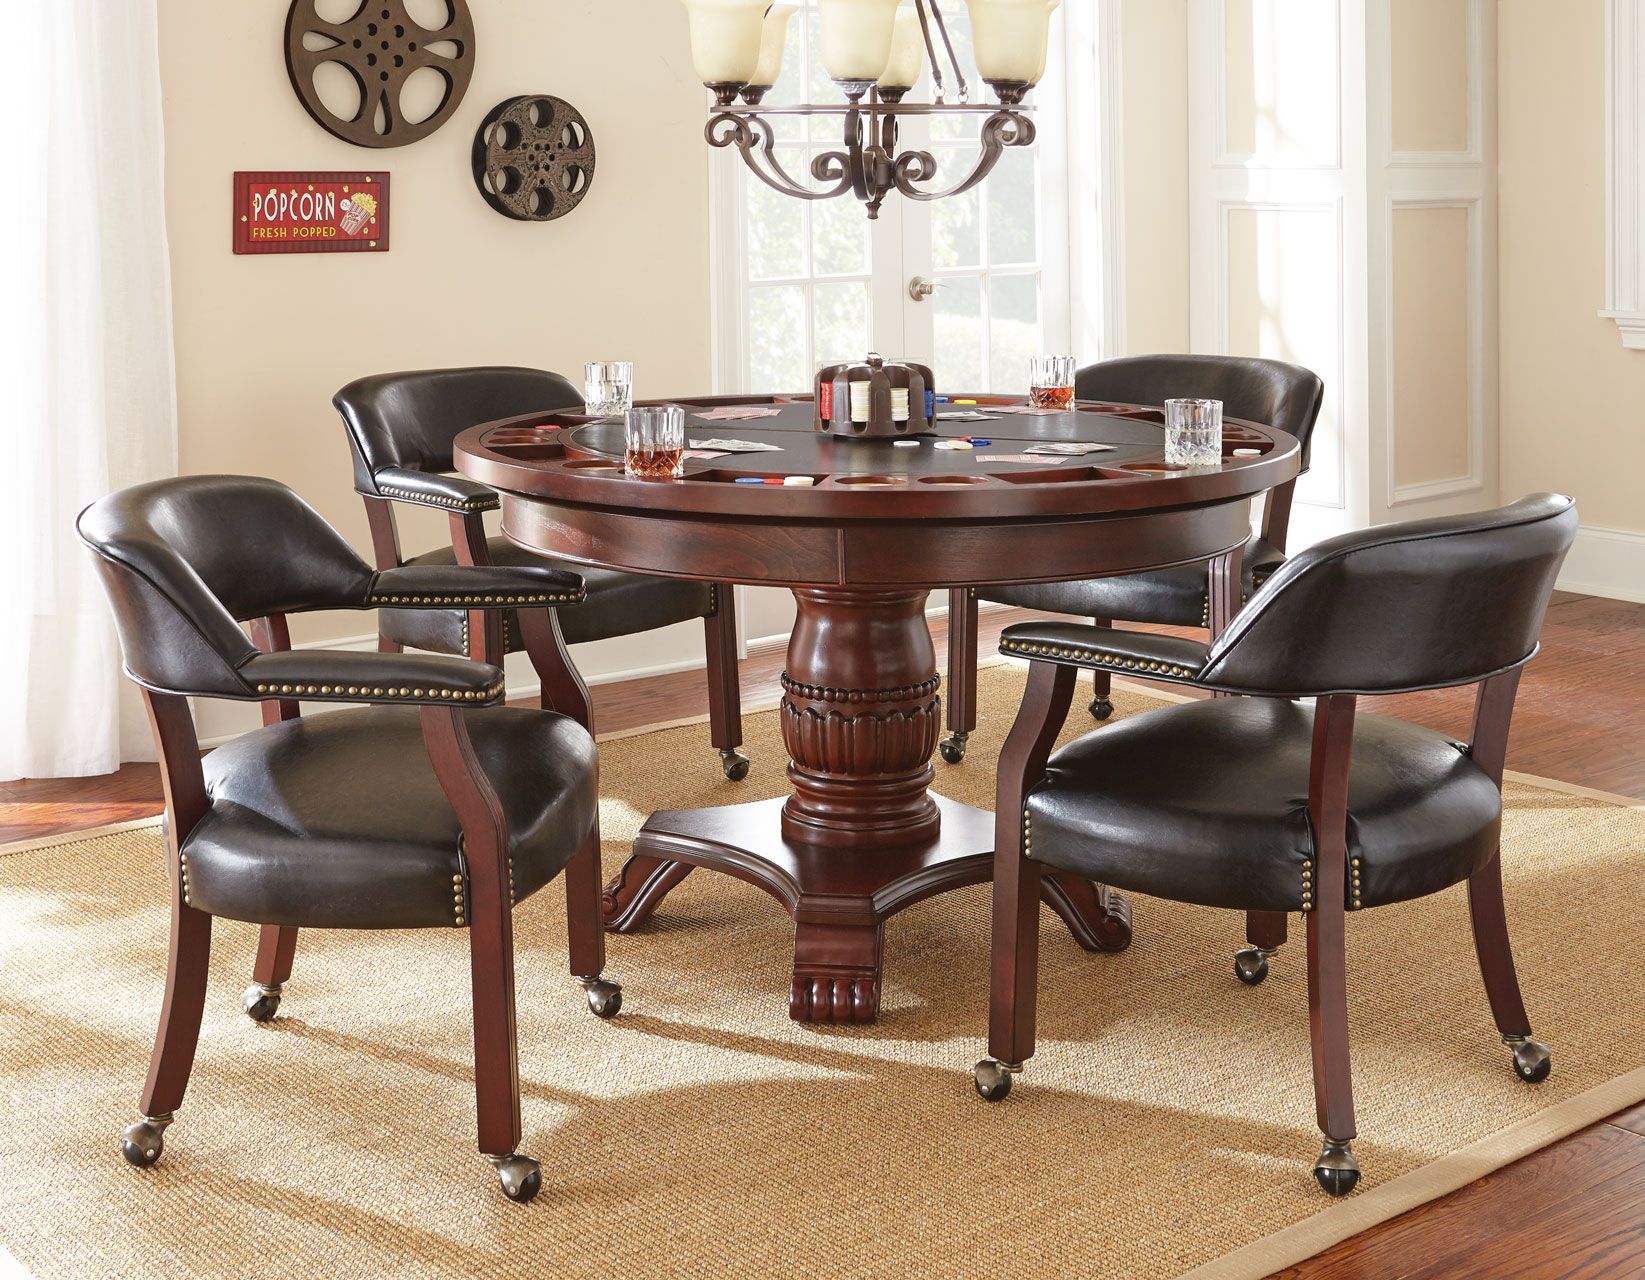 Tournament 6 Piece Dining/Game Table Set - Black Chairs(Dining Table